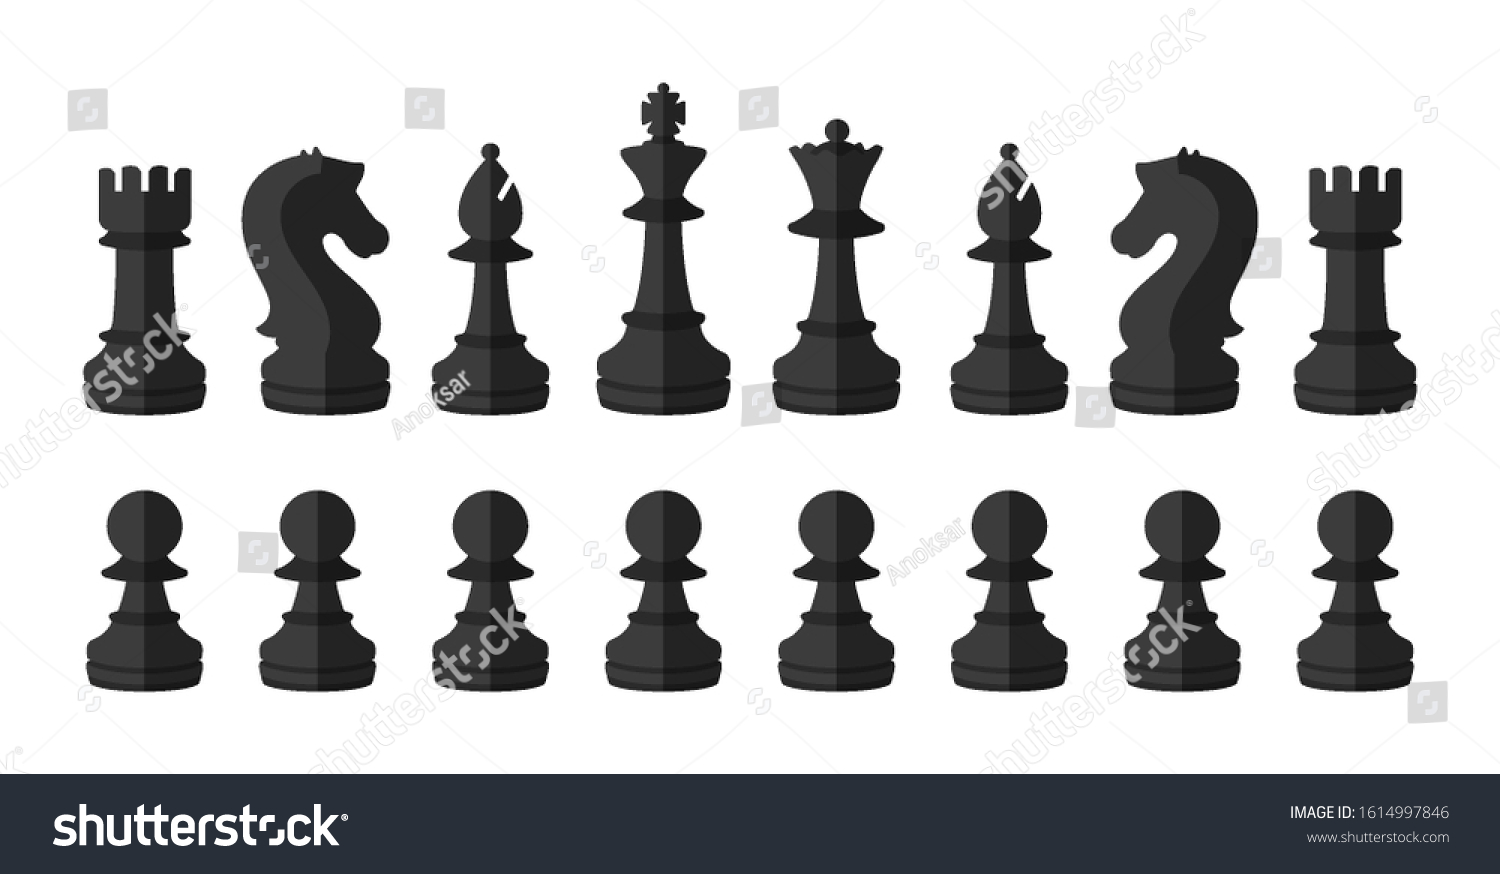 SVG of All black chess pieces isolated on the white background in flat style. Set including the king, queen, bishop, knight, rook and pawns. svg